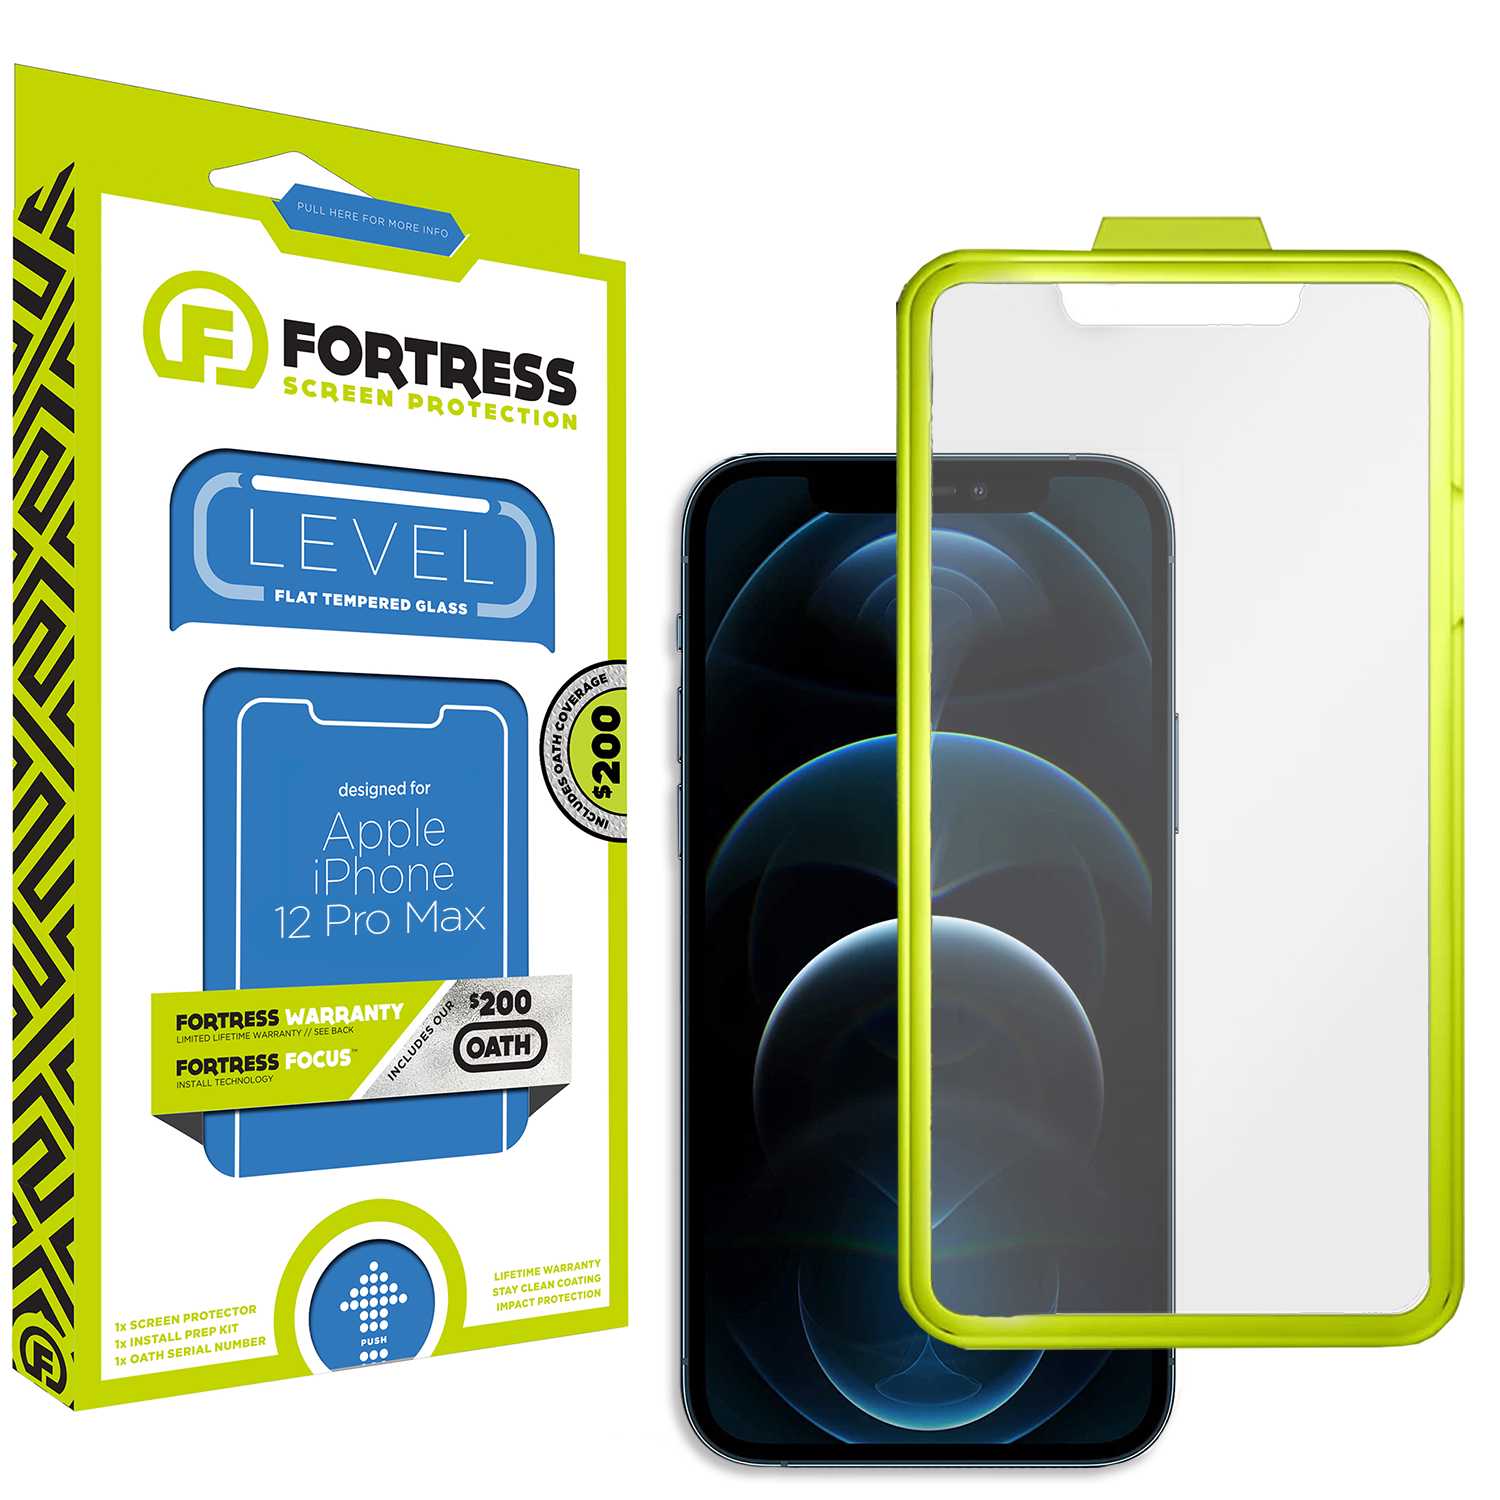 Fortress iPhone 12 Pro Max Screen Protector $200CoverageInstallTool Scooch Screen Protector